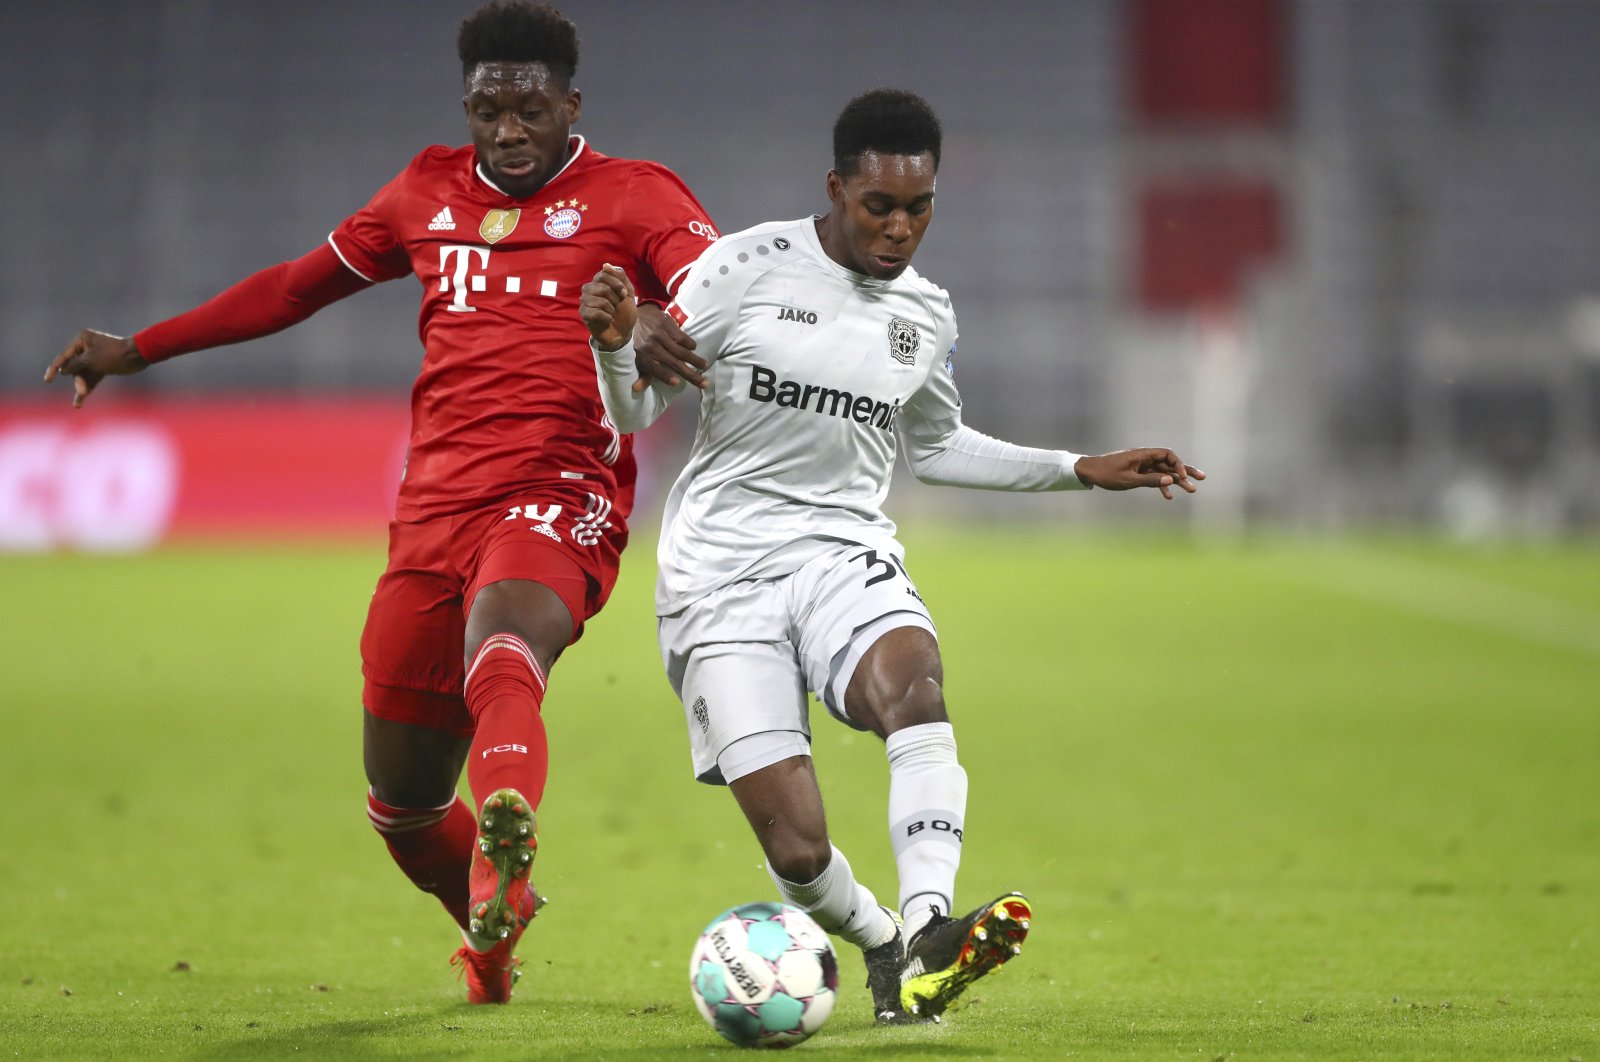 Bayern's Alphonso Davies (L) and Leverkusen's Jeremie Frimpong compete for the ball during a Bundesliga match at the Allianz Arena stadium in Munich, Germany, April 20, 2021. (AP Photo)